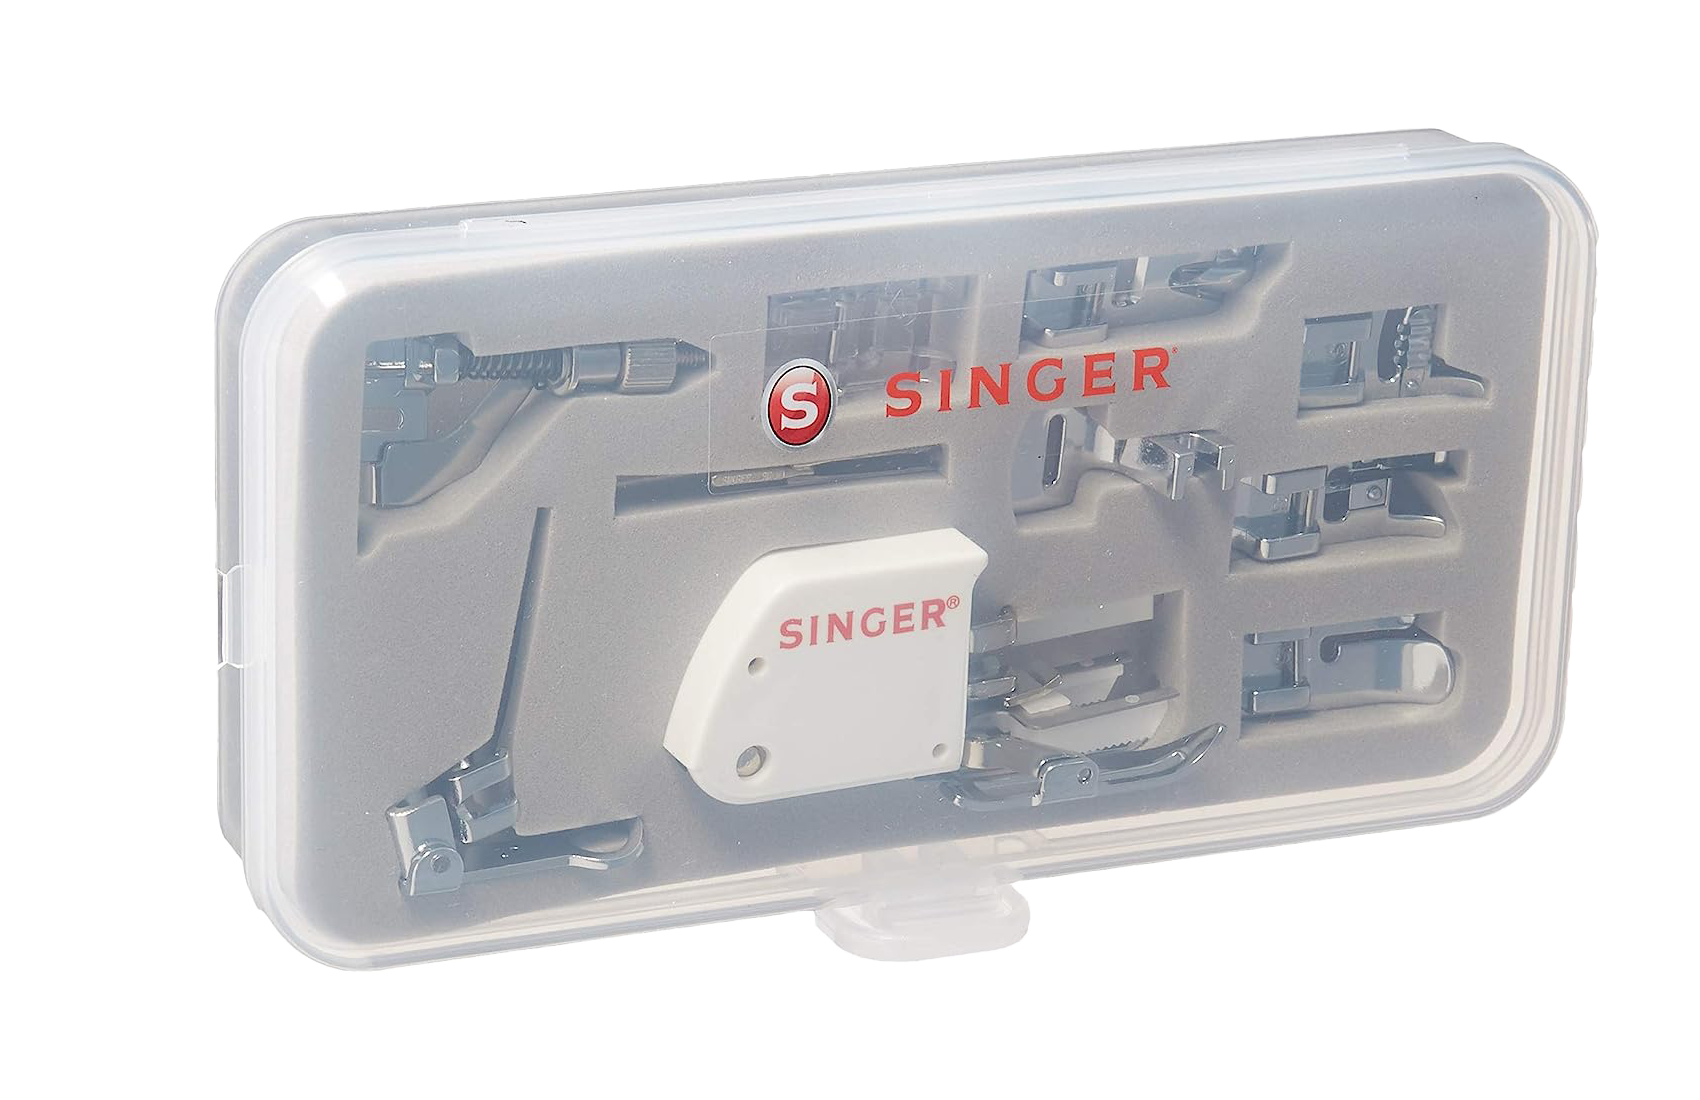 SINGER, 4411 Heavy Duty Sewing Machine With Bangladesh